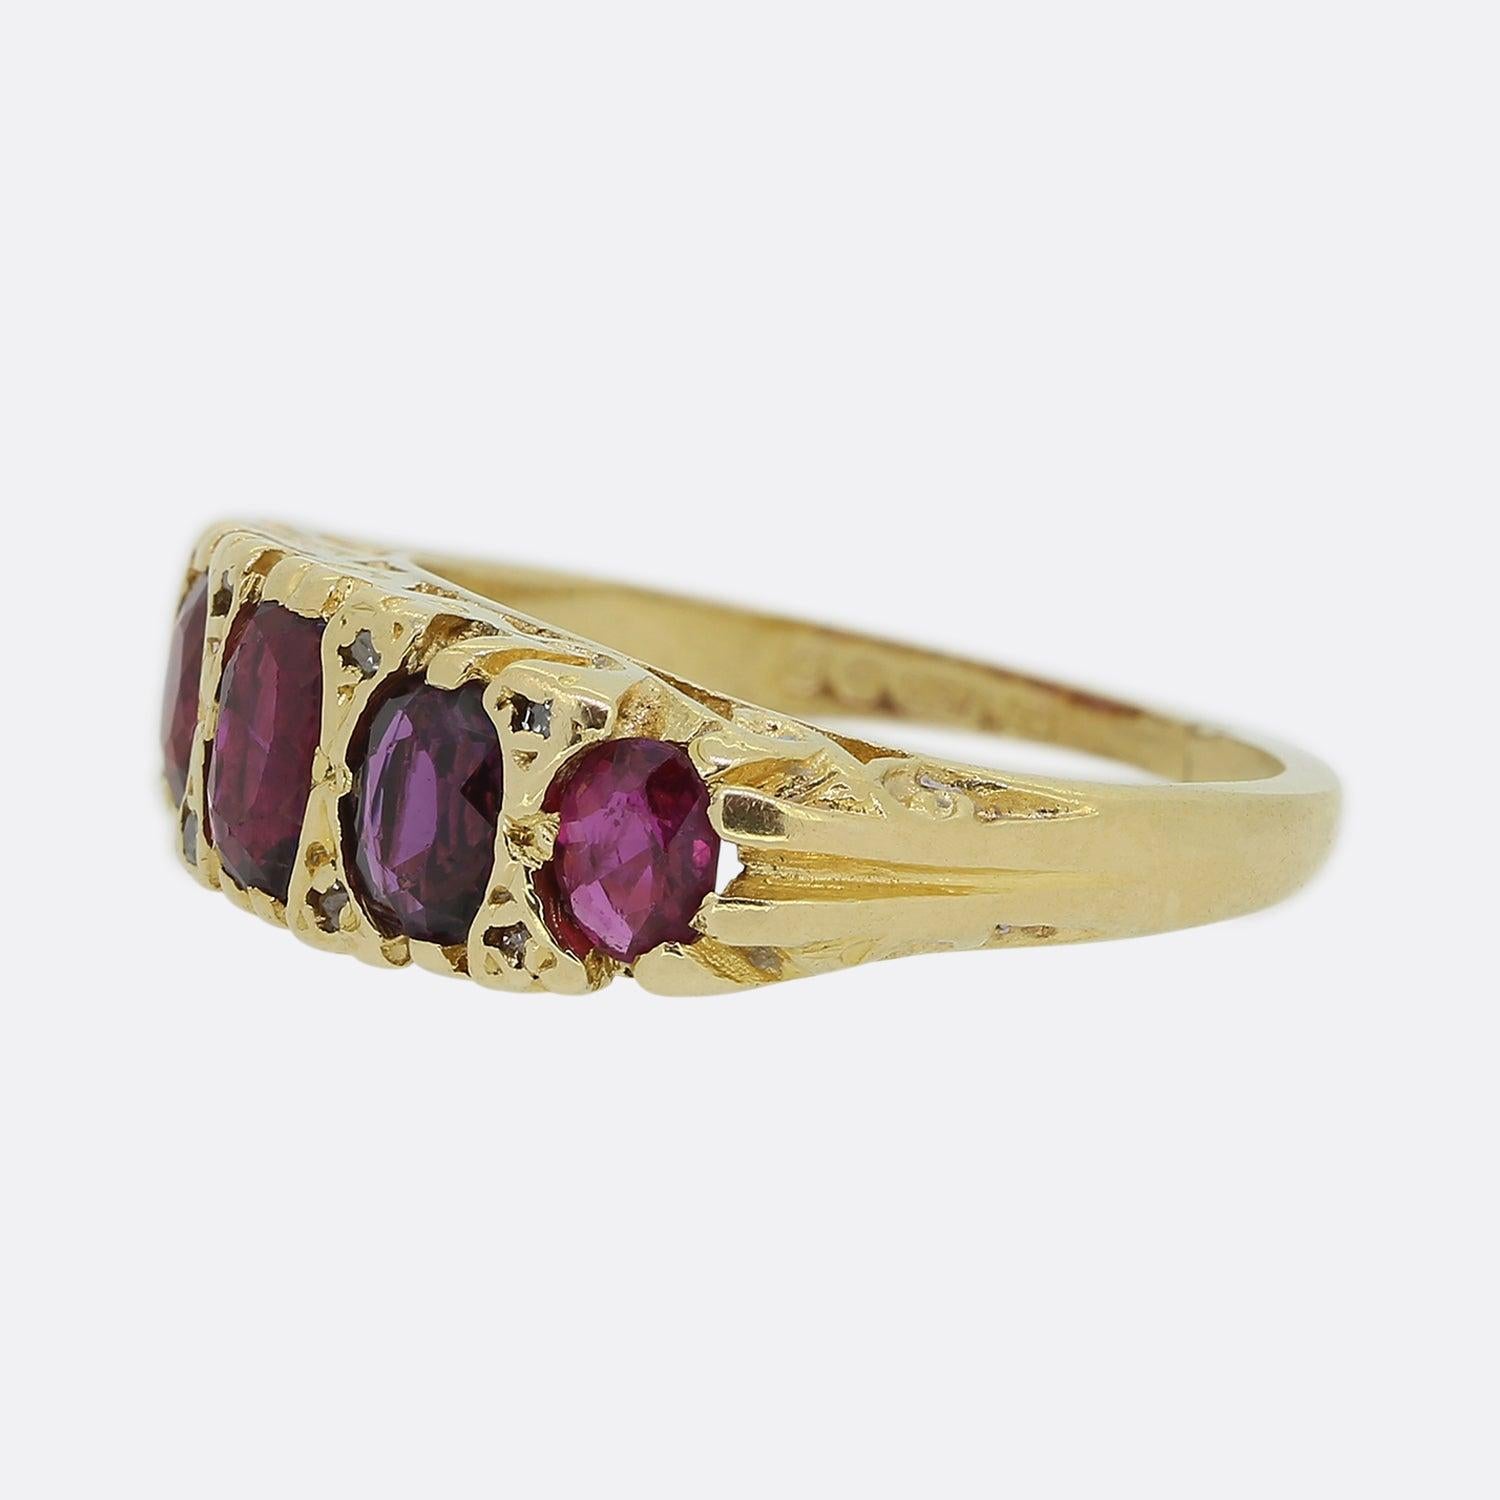 Here we have a classic five-stone ruby ring. This vintage piece has been crafted from 18ct yellow gold and borrows from a Victorian style showcasing 5 oval shaped rubies graduating inwardly in size across the face with an array of tiny rose cut